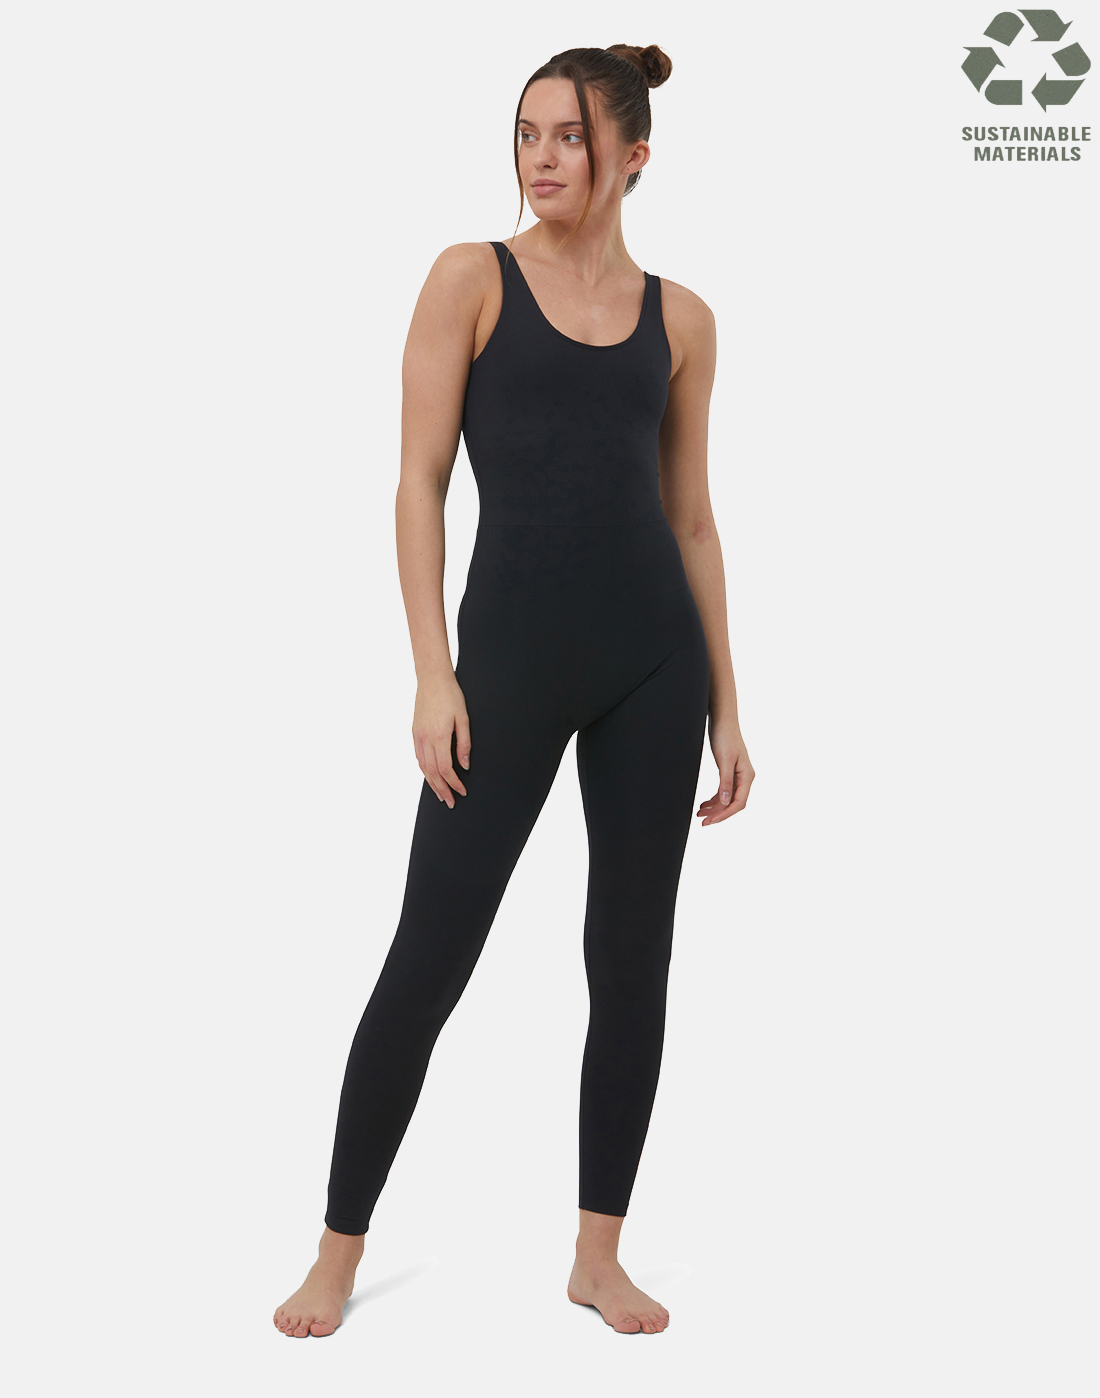 Girlfriend Collective Womens Scoop Back Unitard - Black | Life Style ...